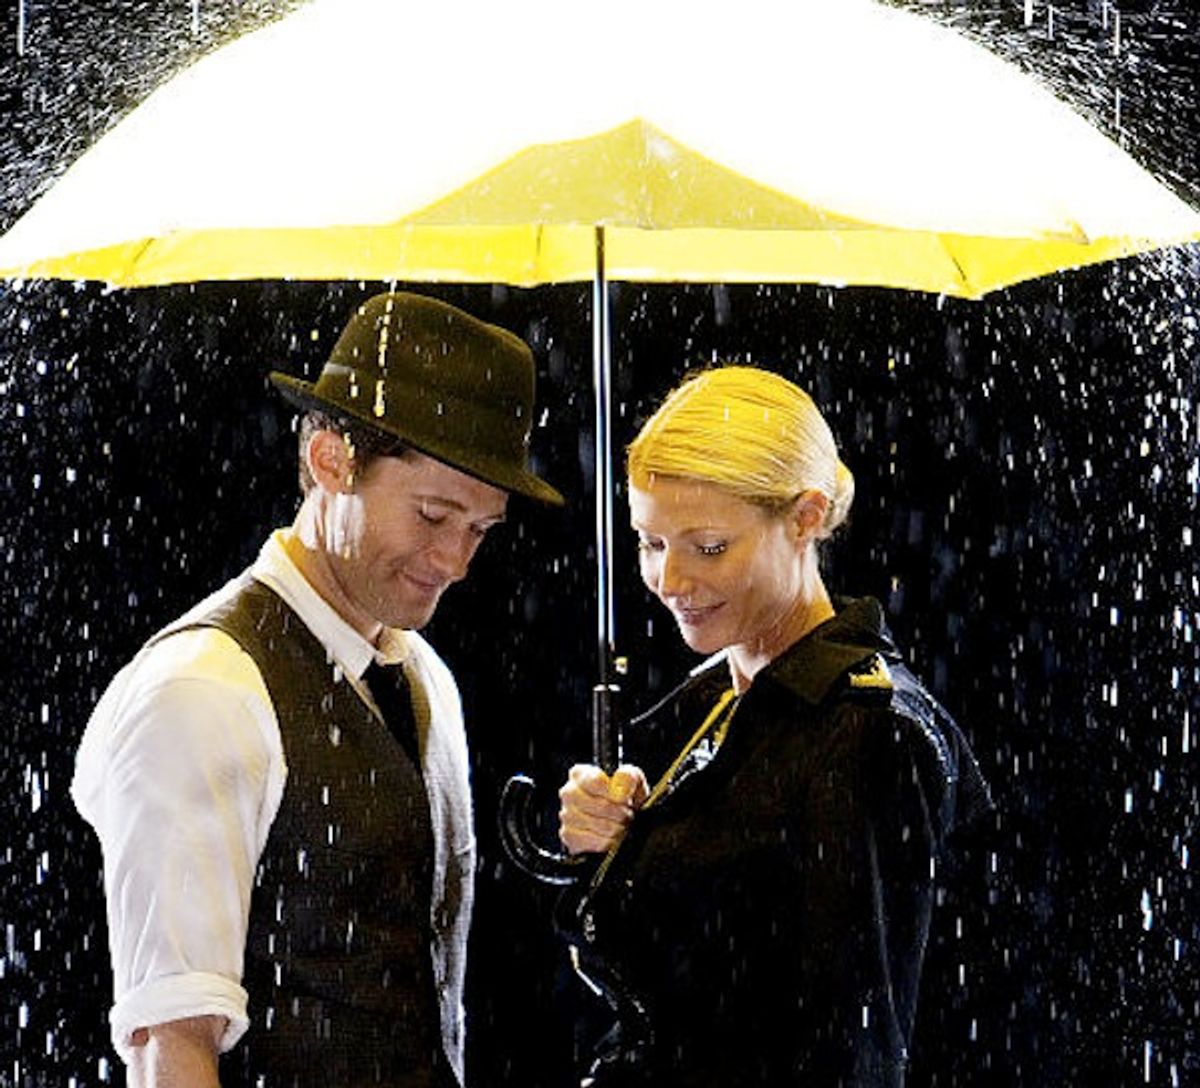 GLEE: Will (Matthew Morrison, L) and Holly (guest star Gwyneth Paltrow, R) perform "Singing in the Rain and "Umbrella" in "The Substitute" episode of GLEE airing Tuesday, Nov. 16 (8:00-9:00 PM ET/PT) on FOX. Â©2010 Fox Broadcasting Co. CR: Adam Rose/FOX   Original Filename: gleegwyneth.jpg (Rose/fox)